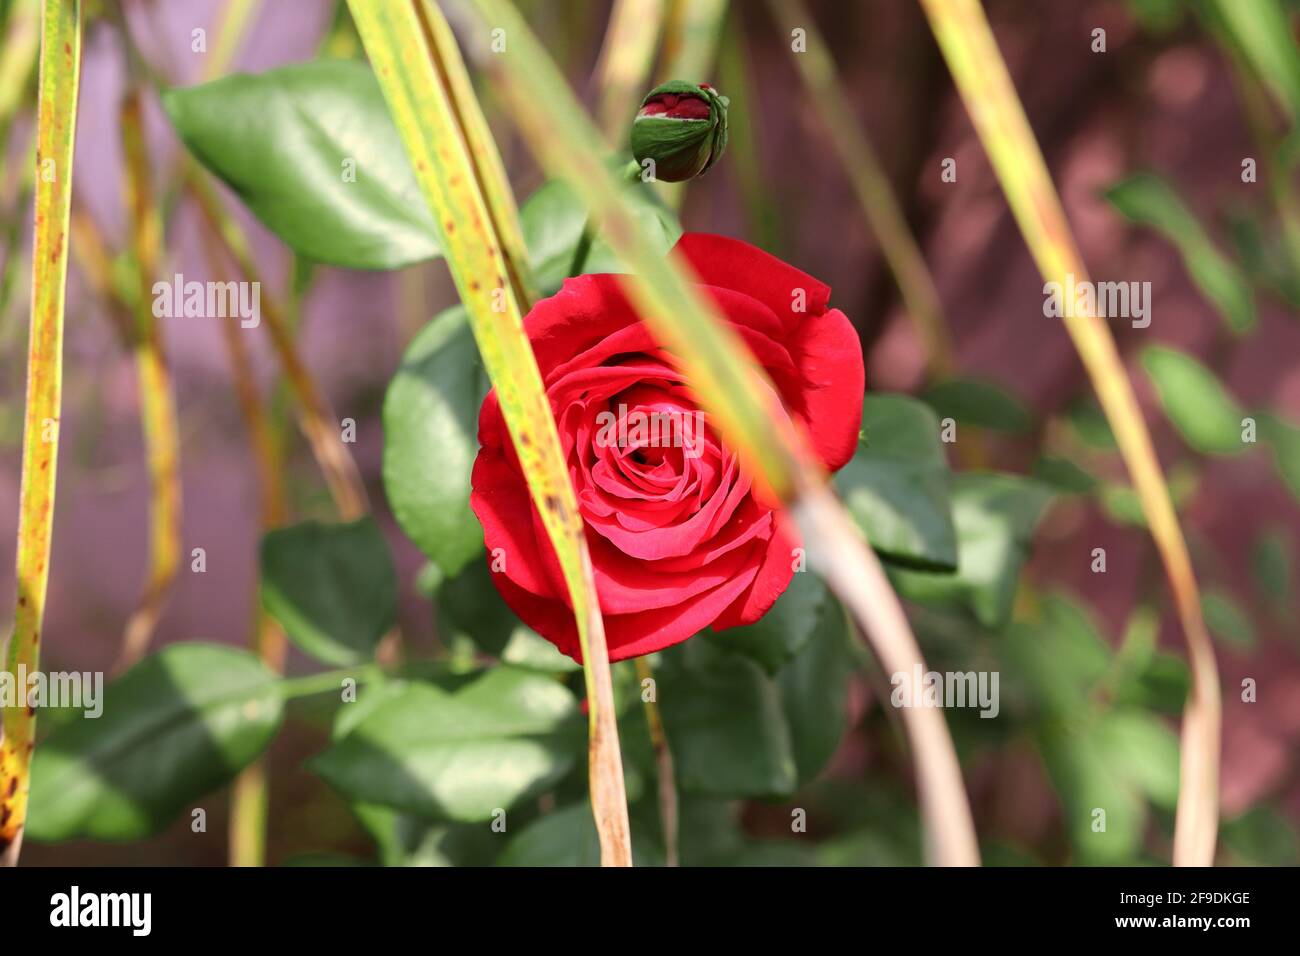 Close-up shot A beautiful rose flower with a foreground of coconut leaves Stock Photo